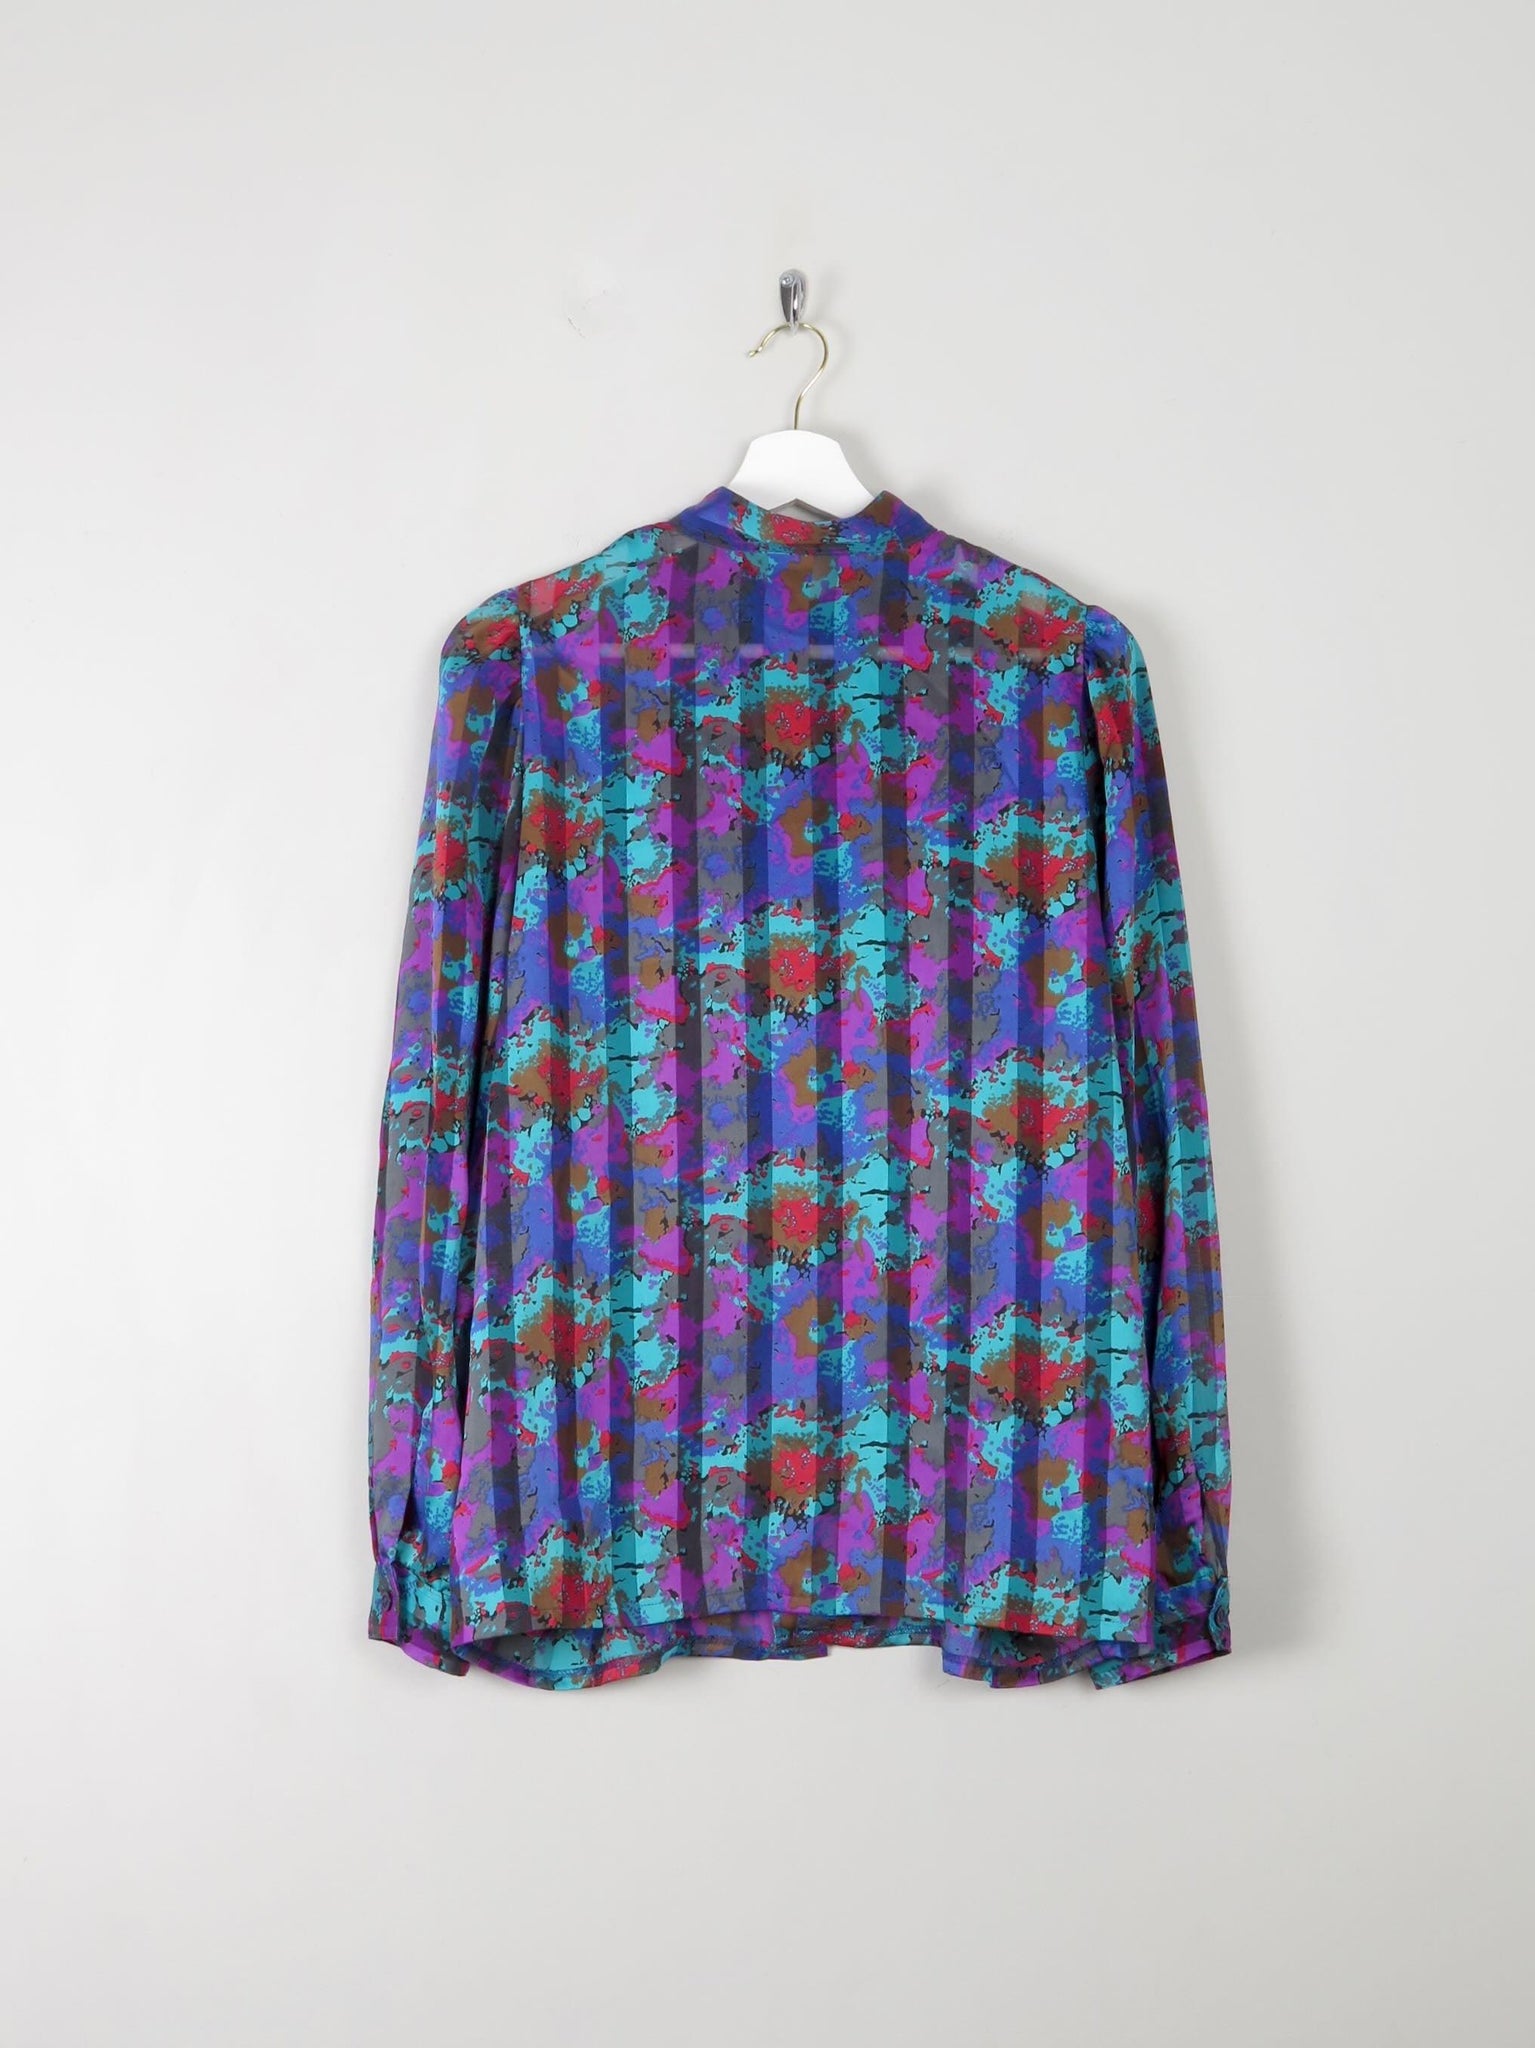 Women's Vintage Printed Blouse M - The Harlequin